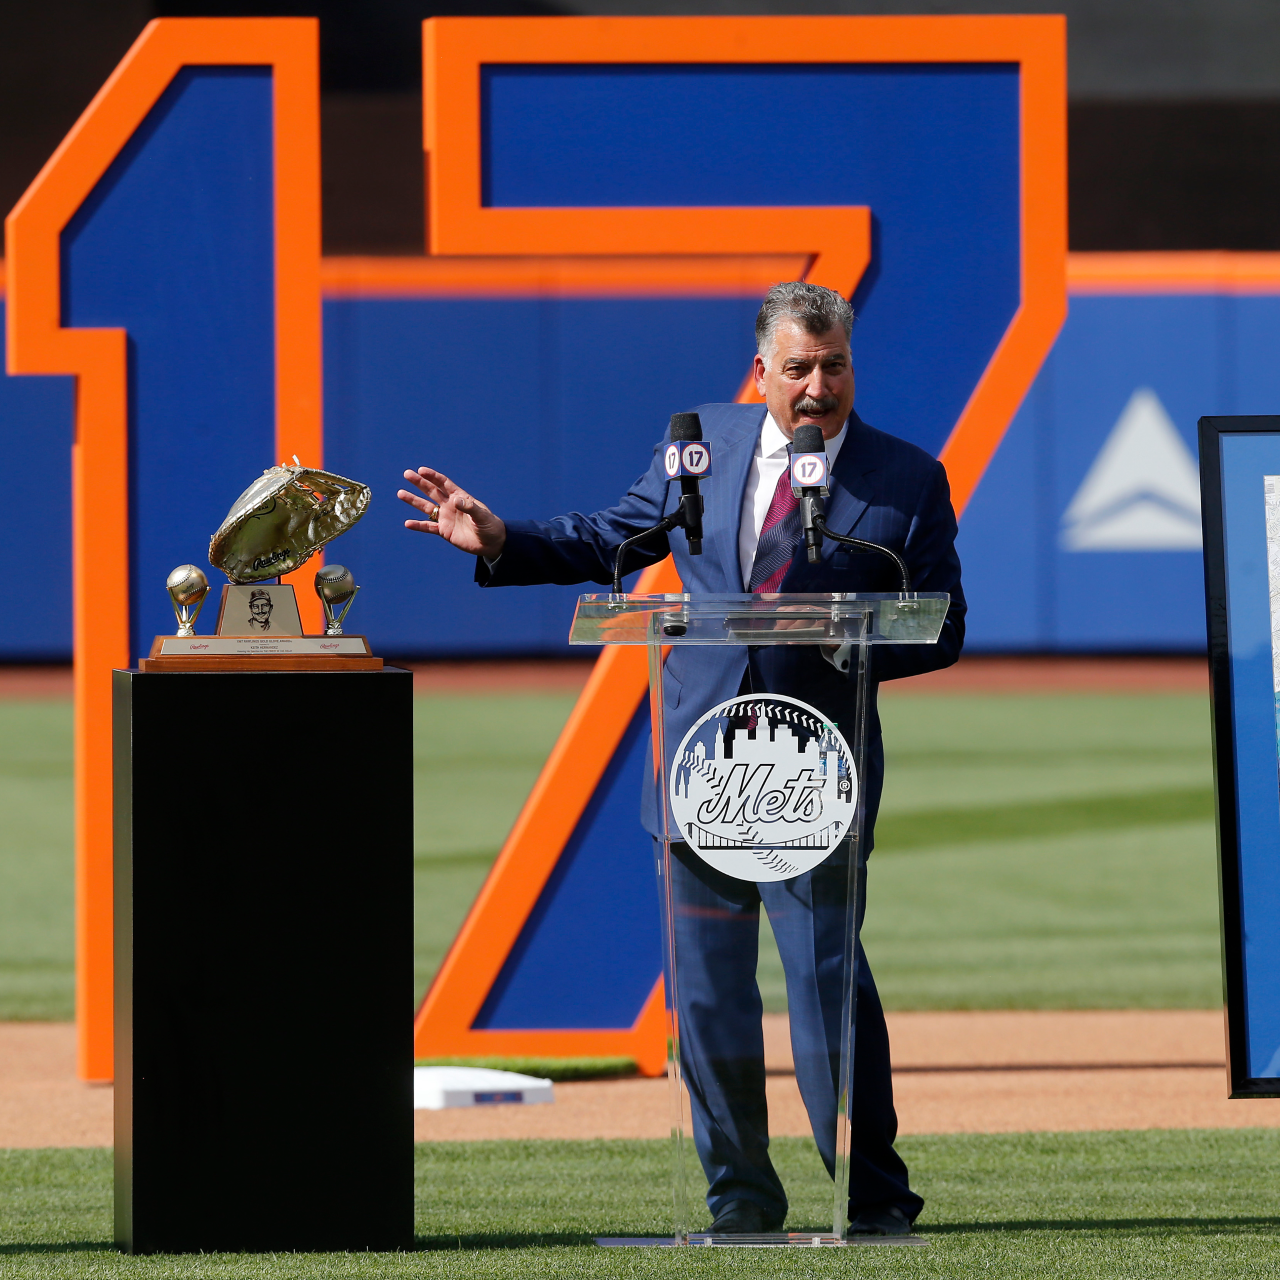 Keith Hernandez Caught Off Guard By Jersey Retirement, Reveals